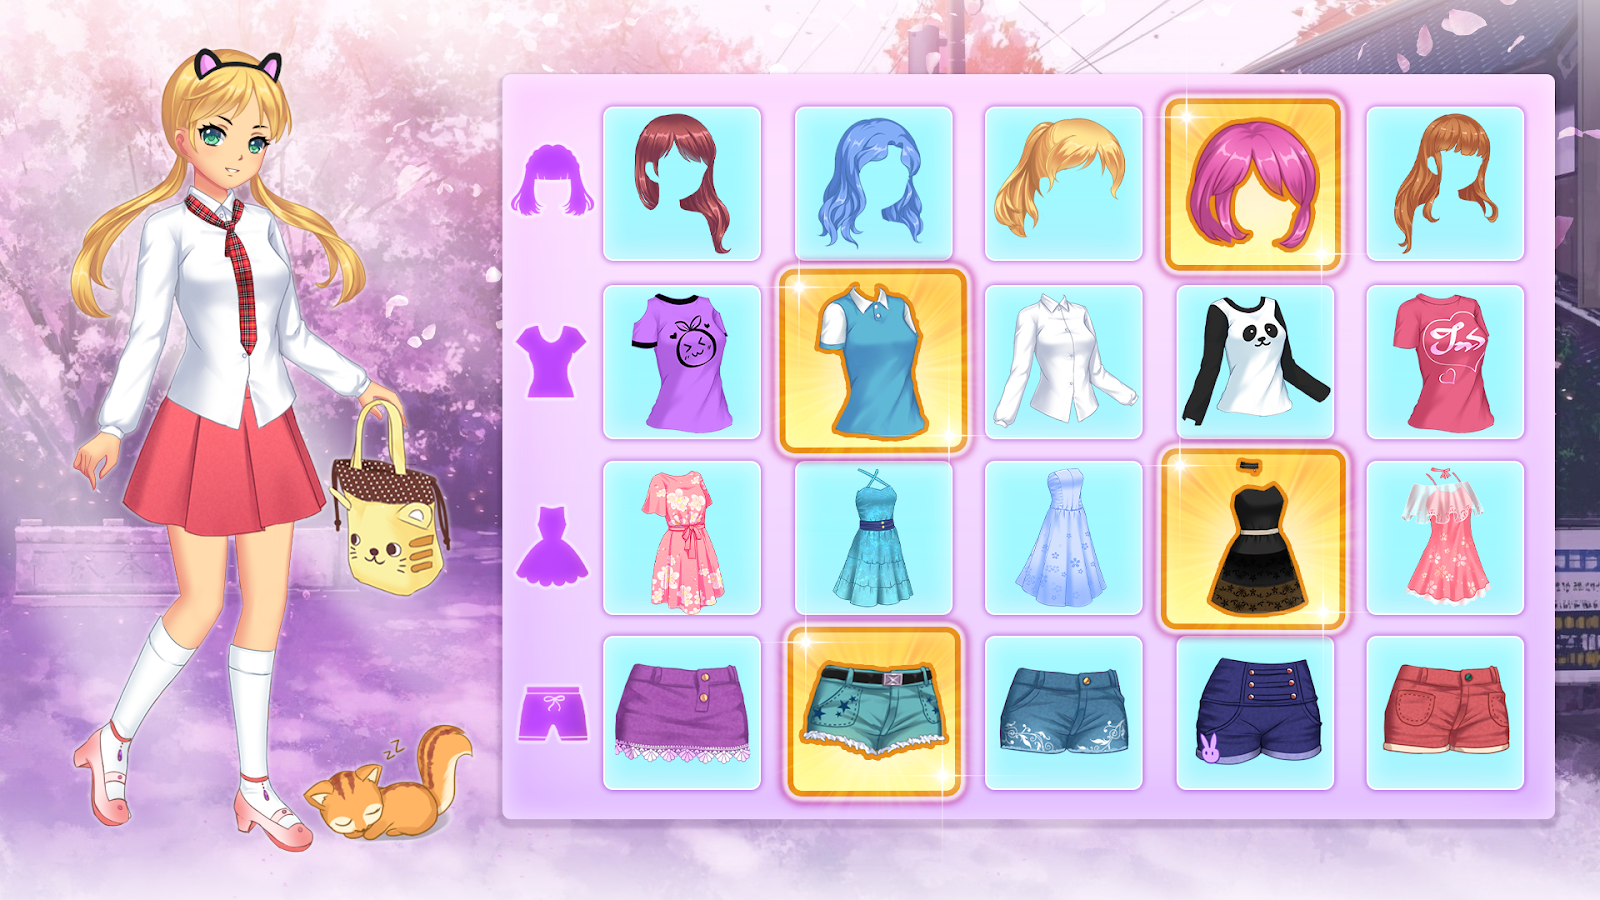 Anime Dress Up Games For Girls  APK Download - Android Simulation Games